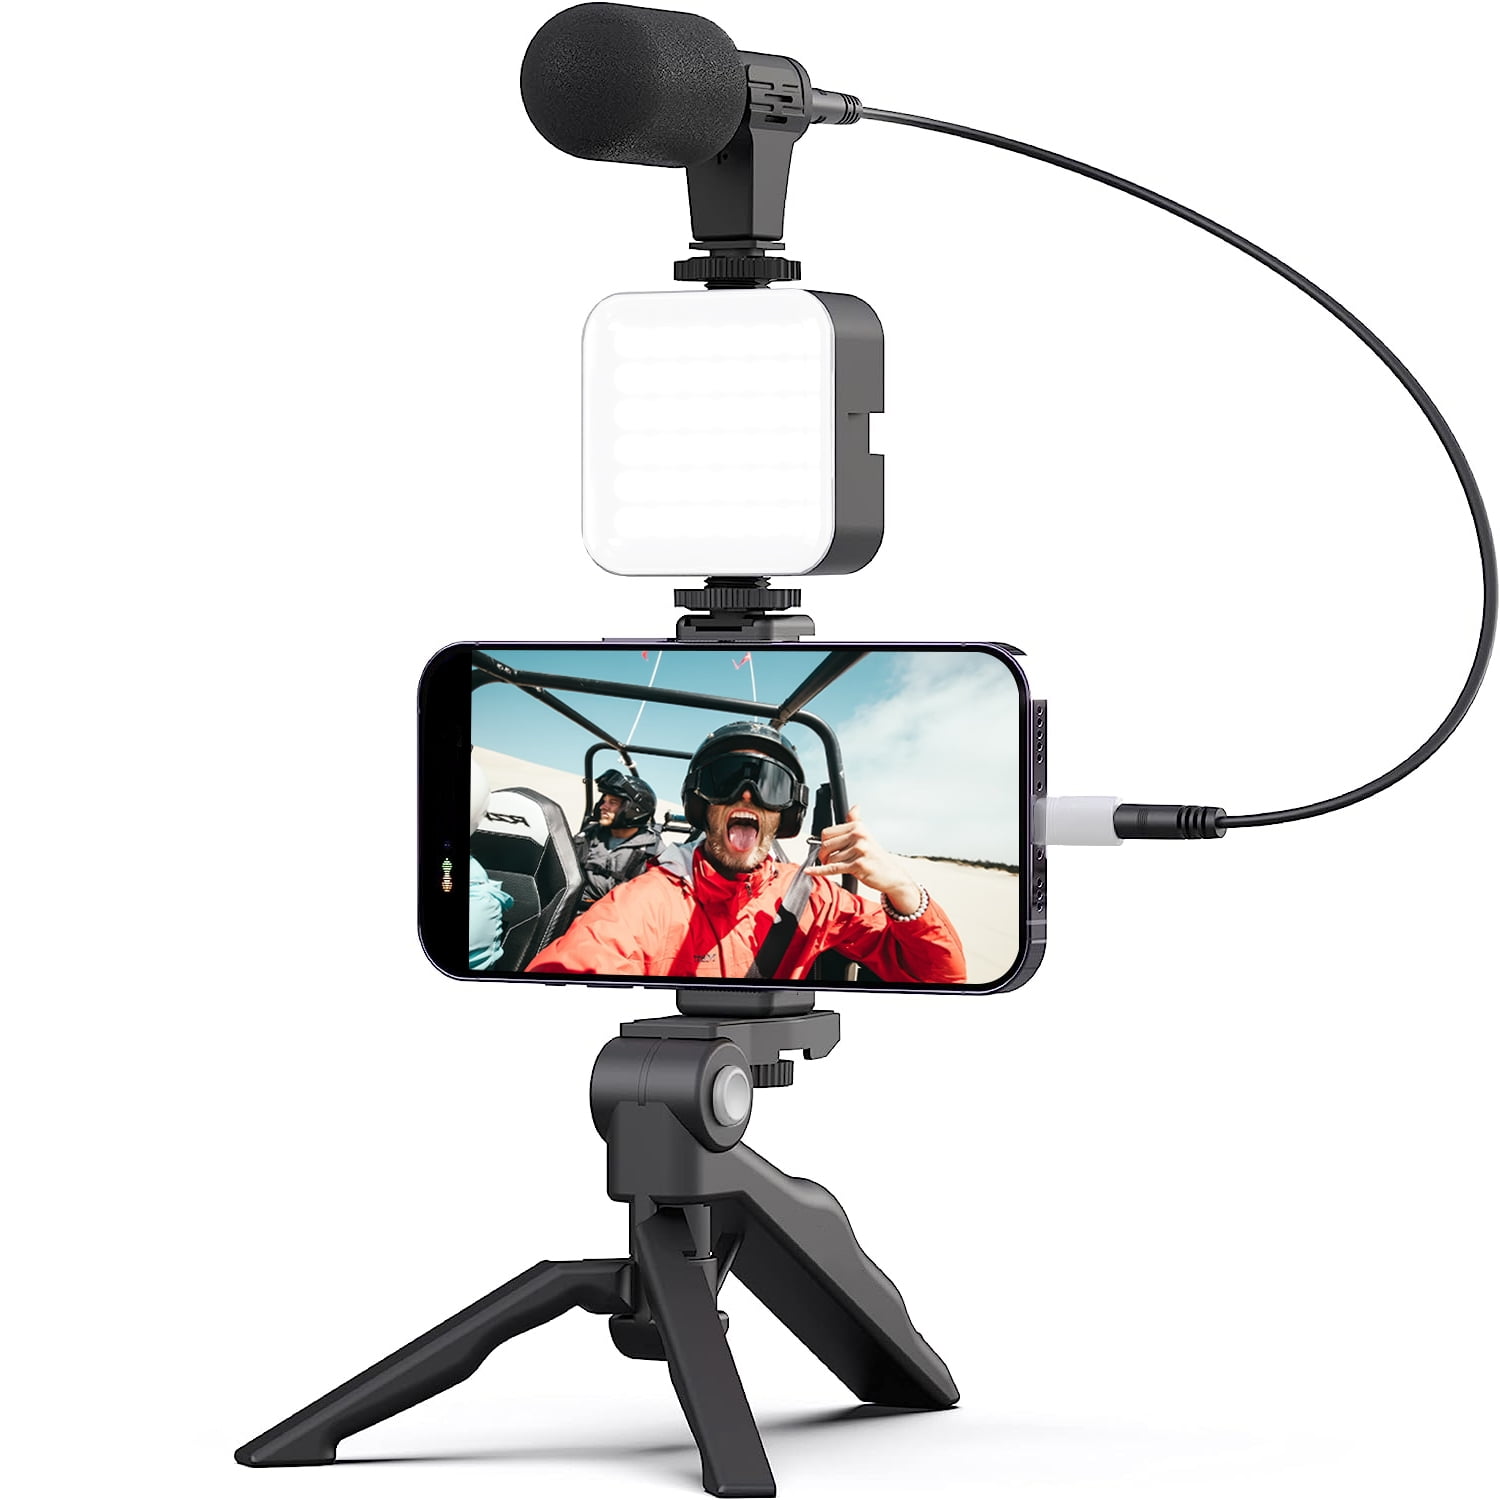 Smartphone Video Microphone Kit, Shotgun Mic Video Recording Accessories  W/LED Light, Phone Holder, Tripod, Compatible with iPhone 12 Xs Max 11 Pro  8